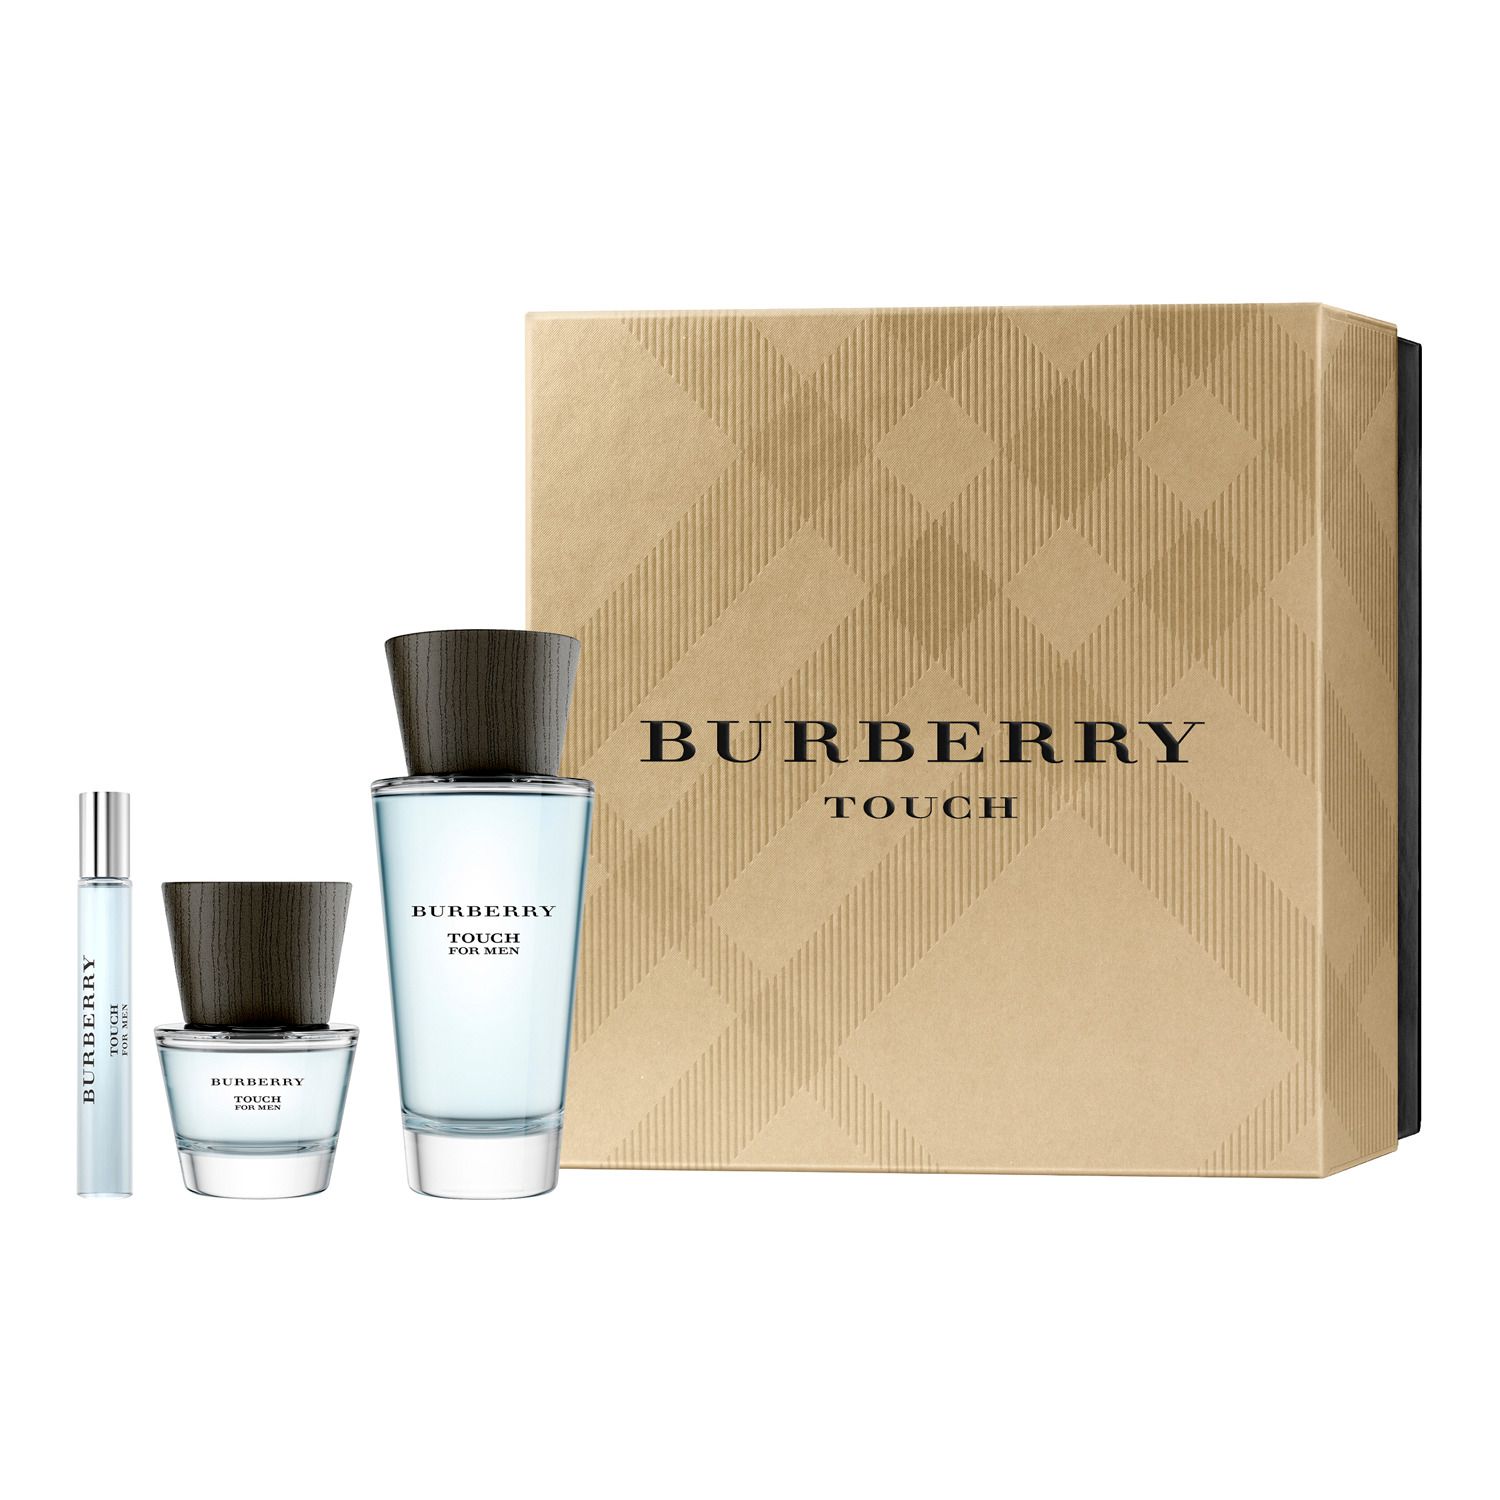 burberry touch cologne gift set